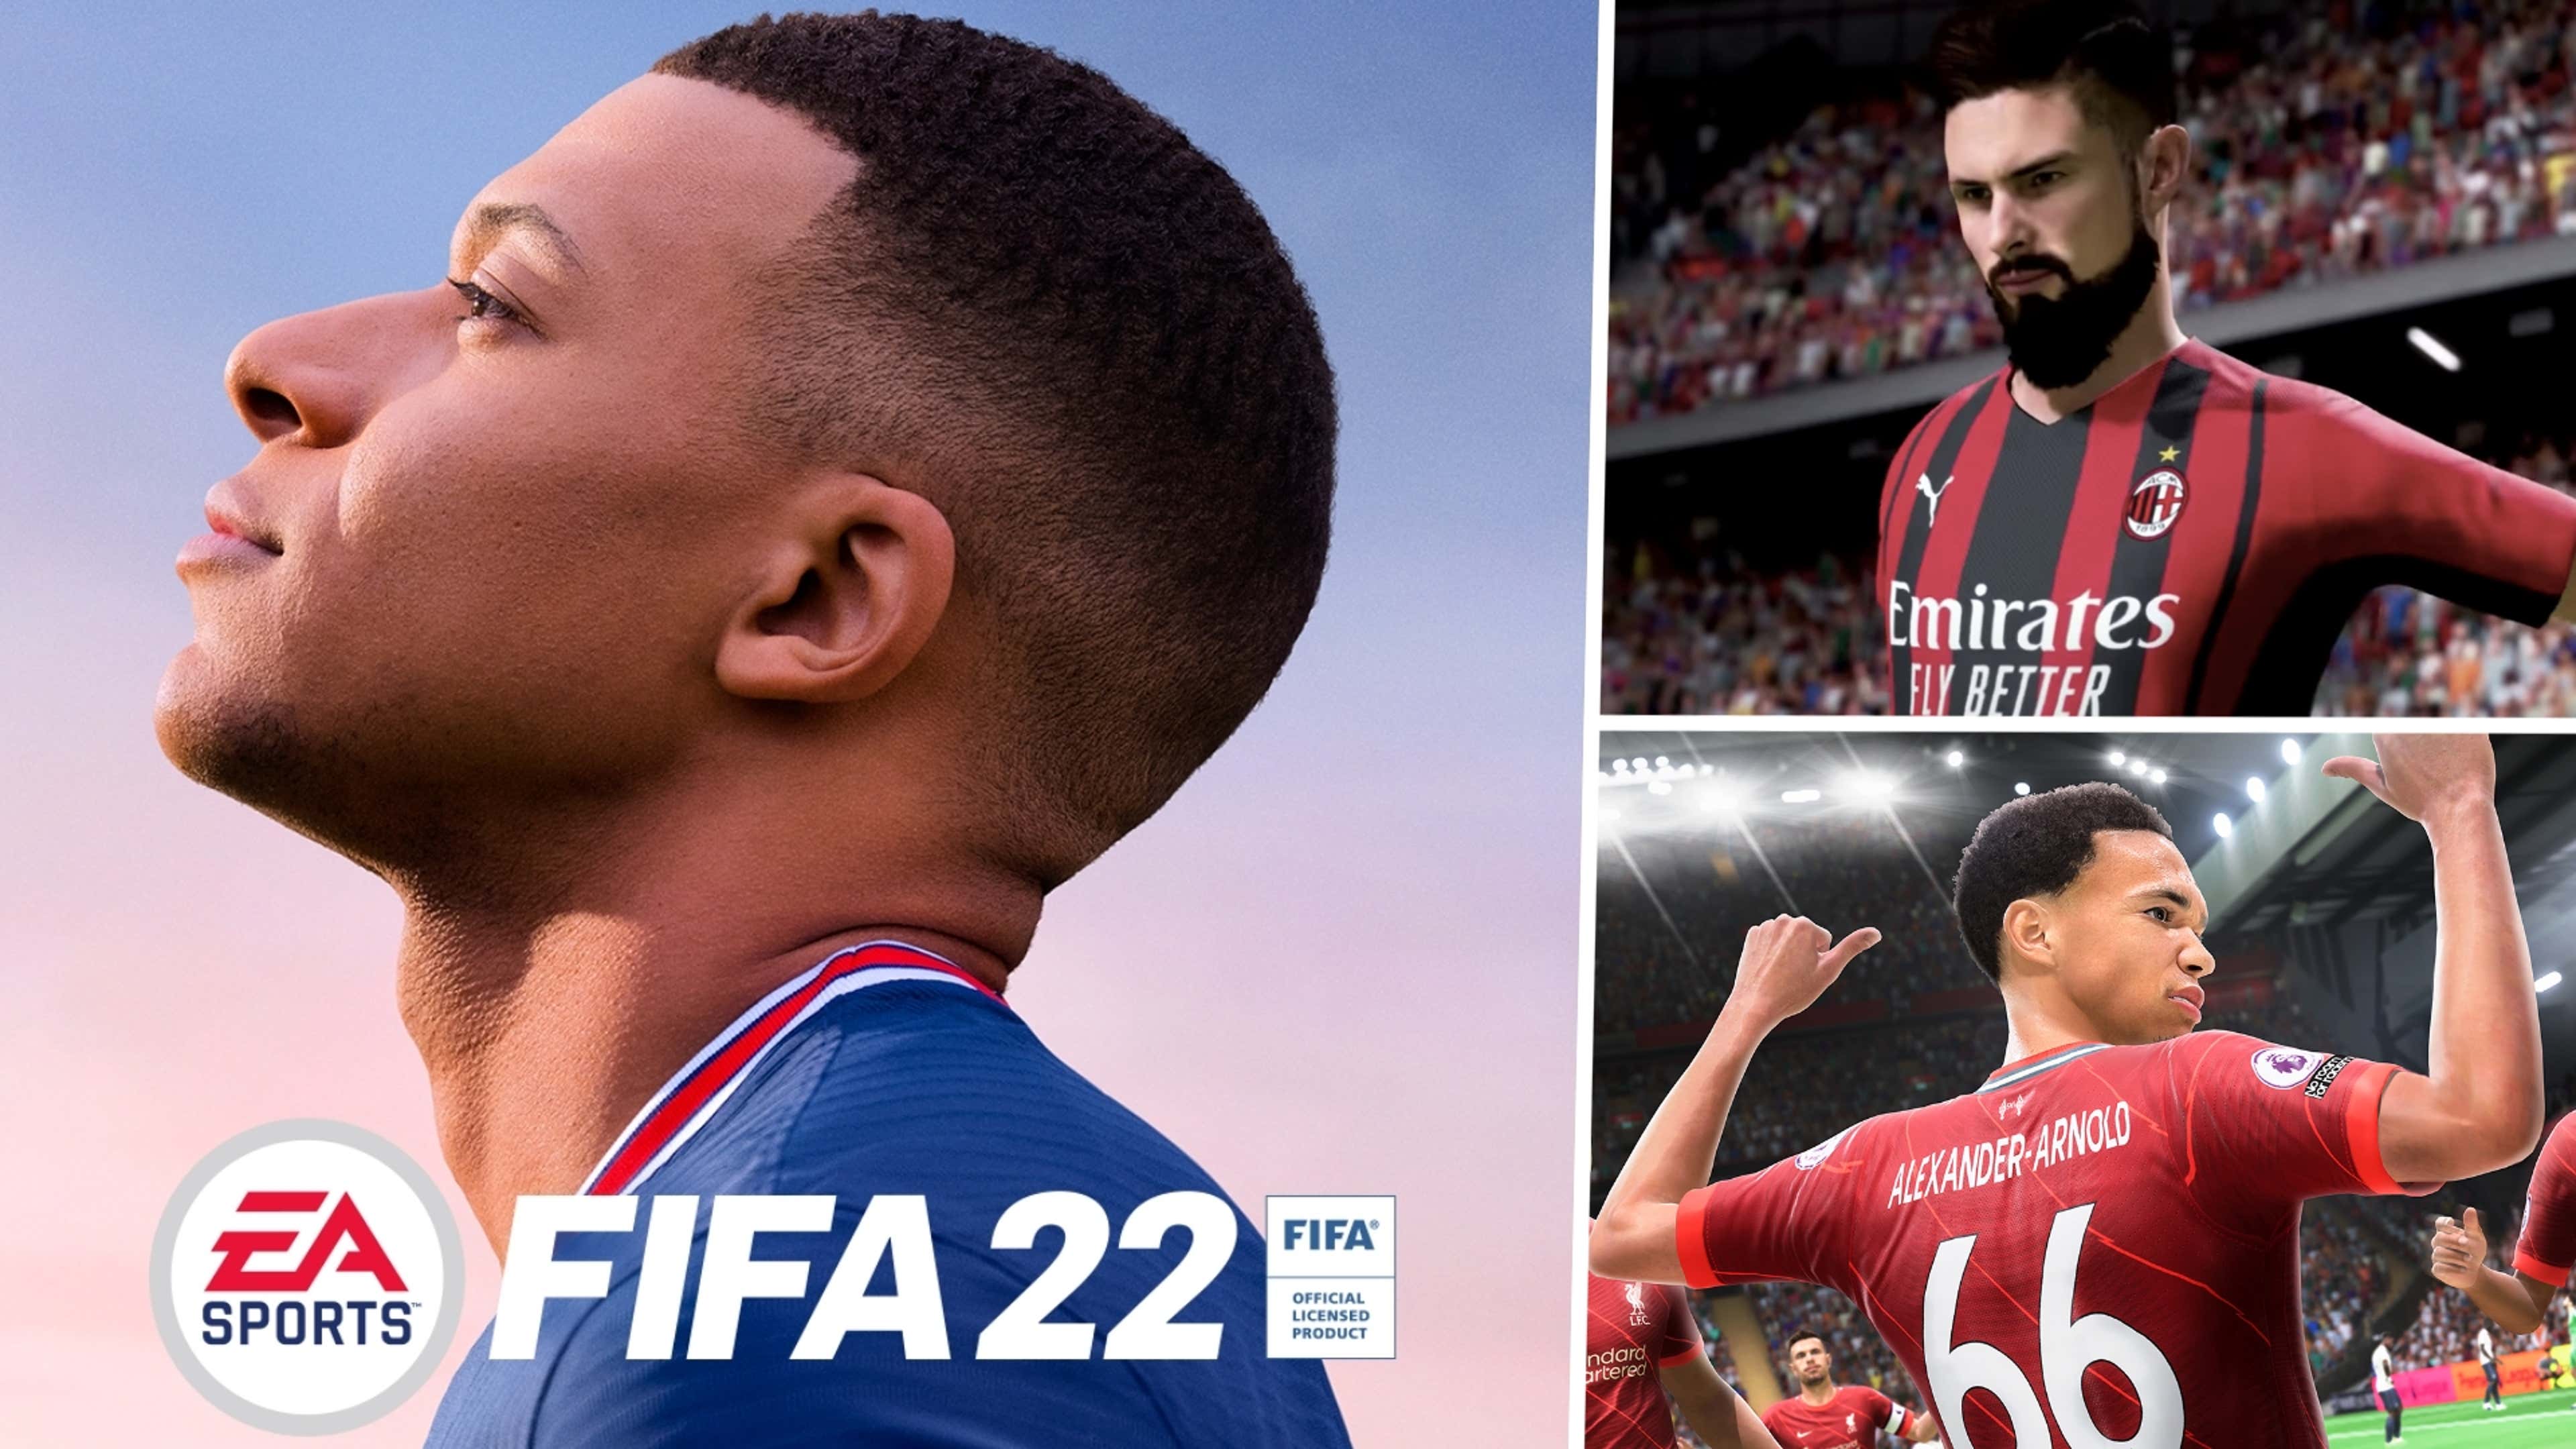 FIFA 22 leagues competitions